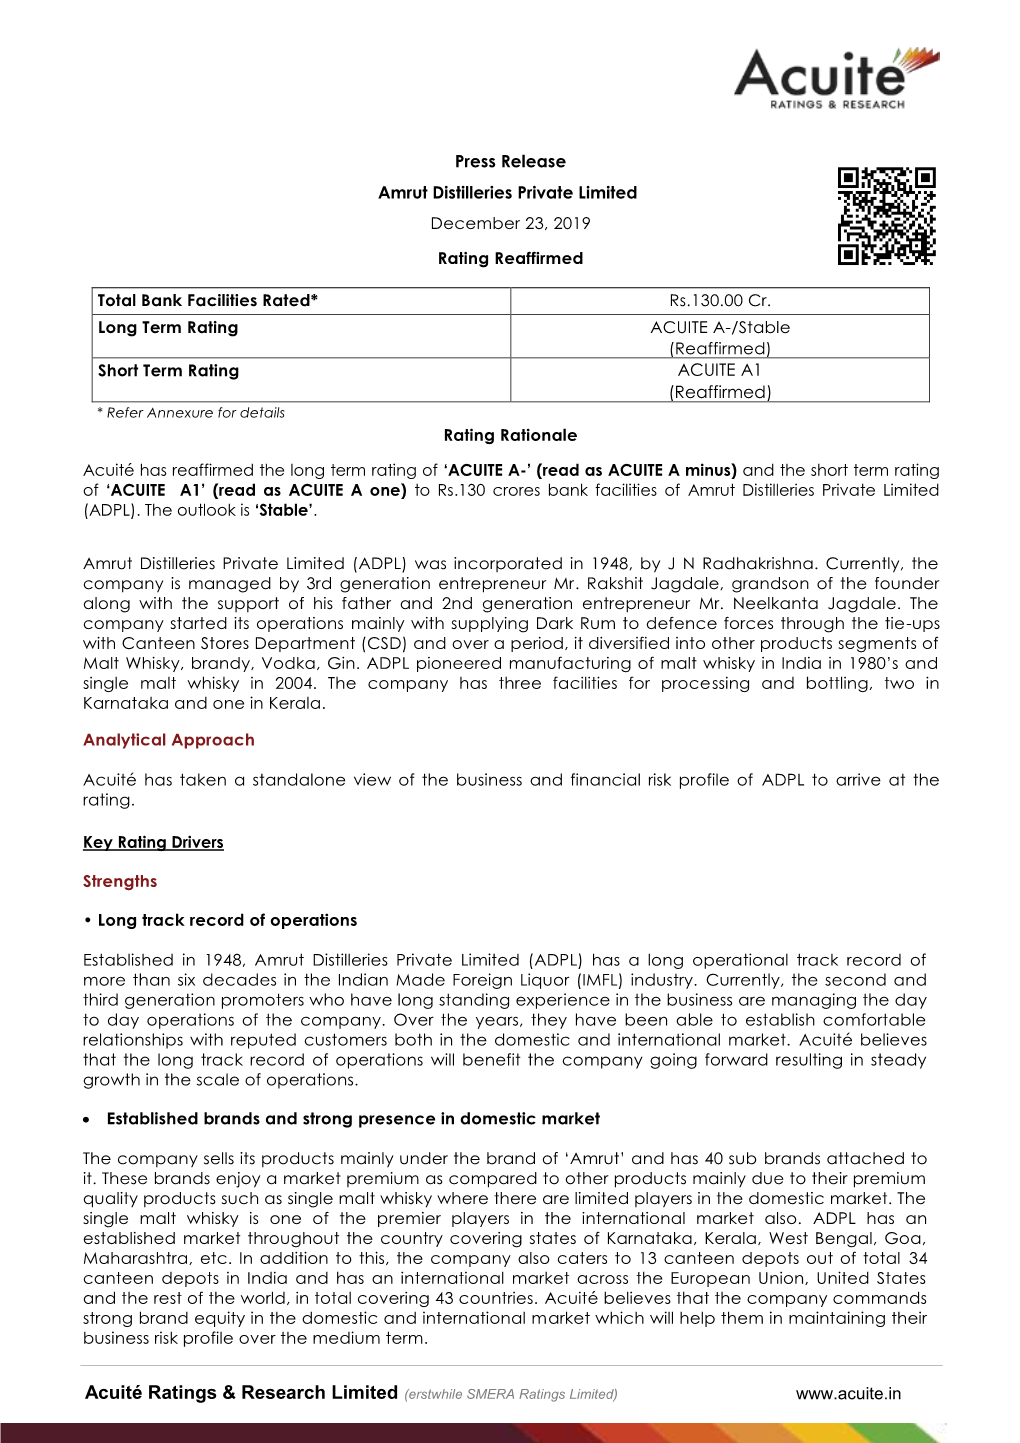 Acuité Ratings & Research Limited (Erstwhile SMERA Ratings Limited)